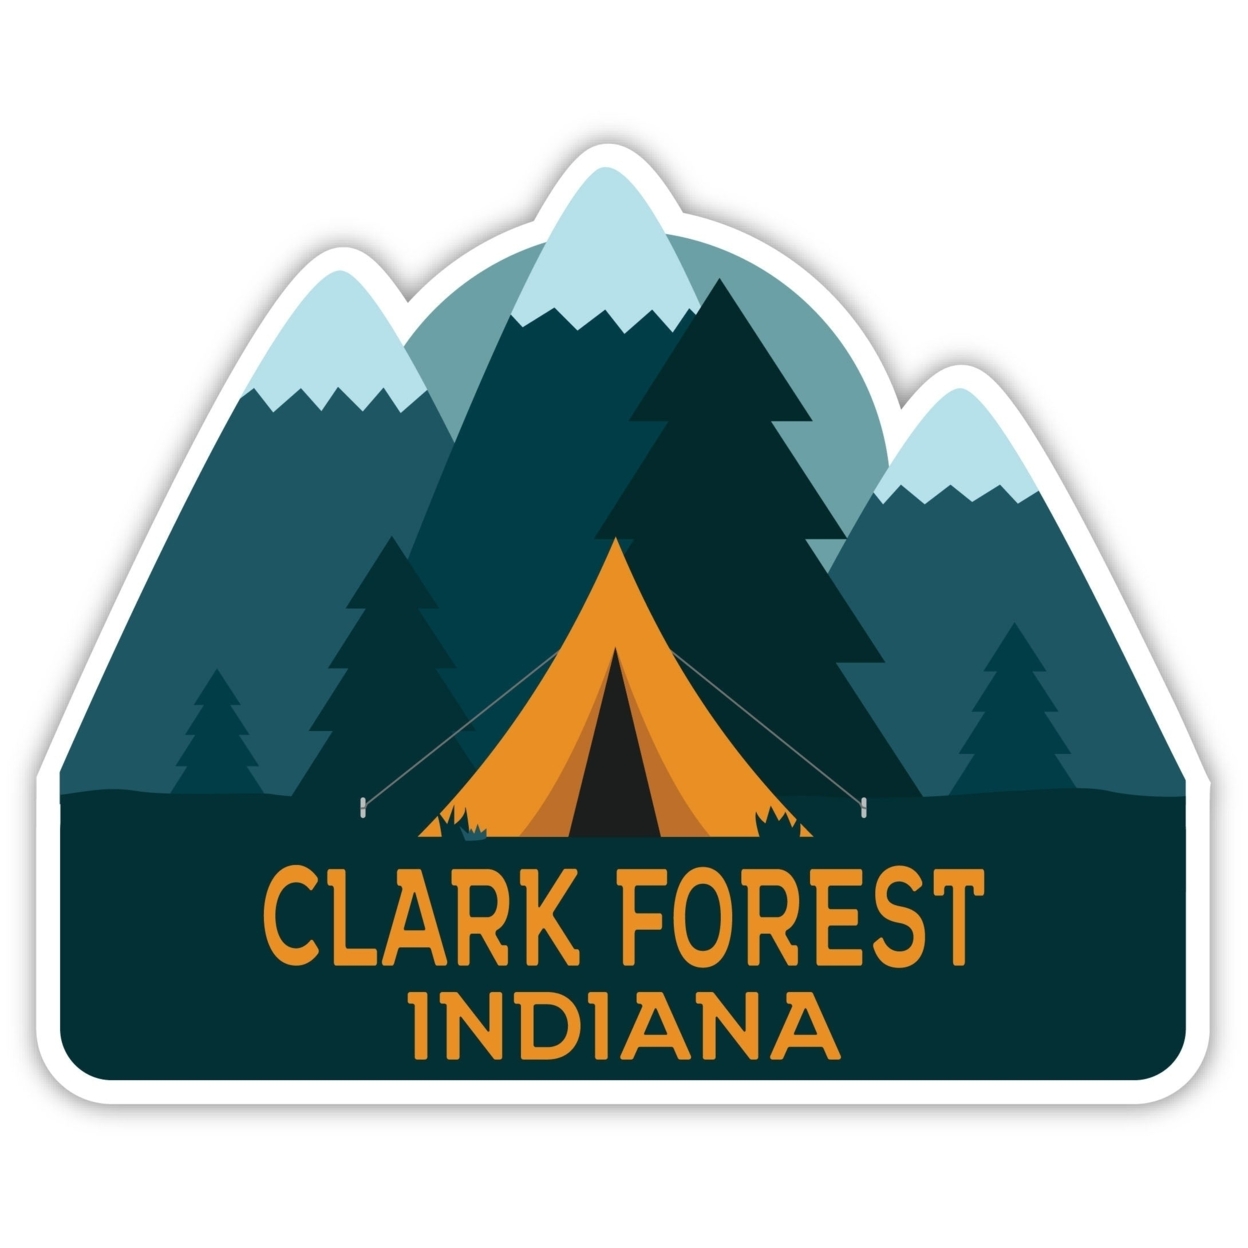 Clark Forest Indiana Souvenir Decorative Stickers (Choose Theme And Size) - Single Unit, 2-Inch, Tent